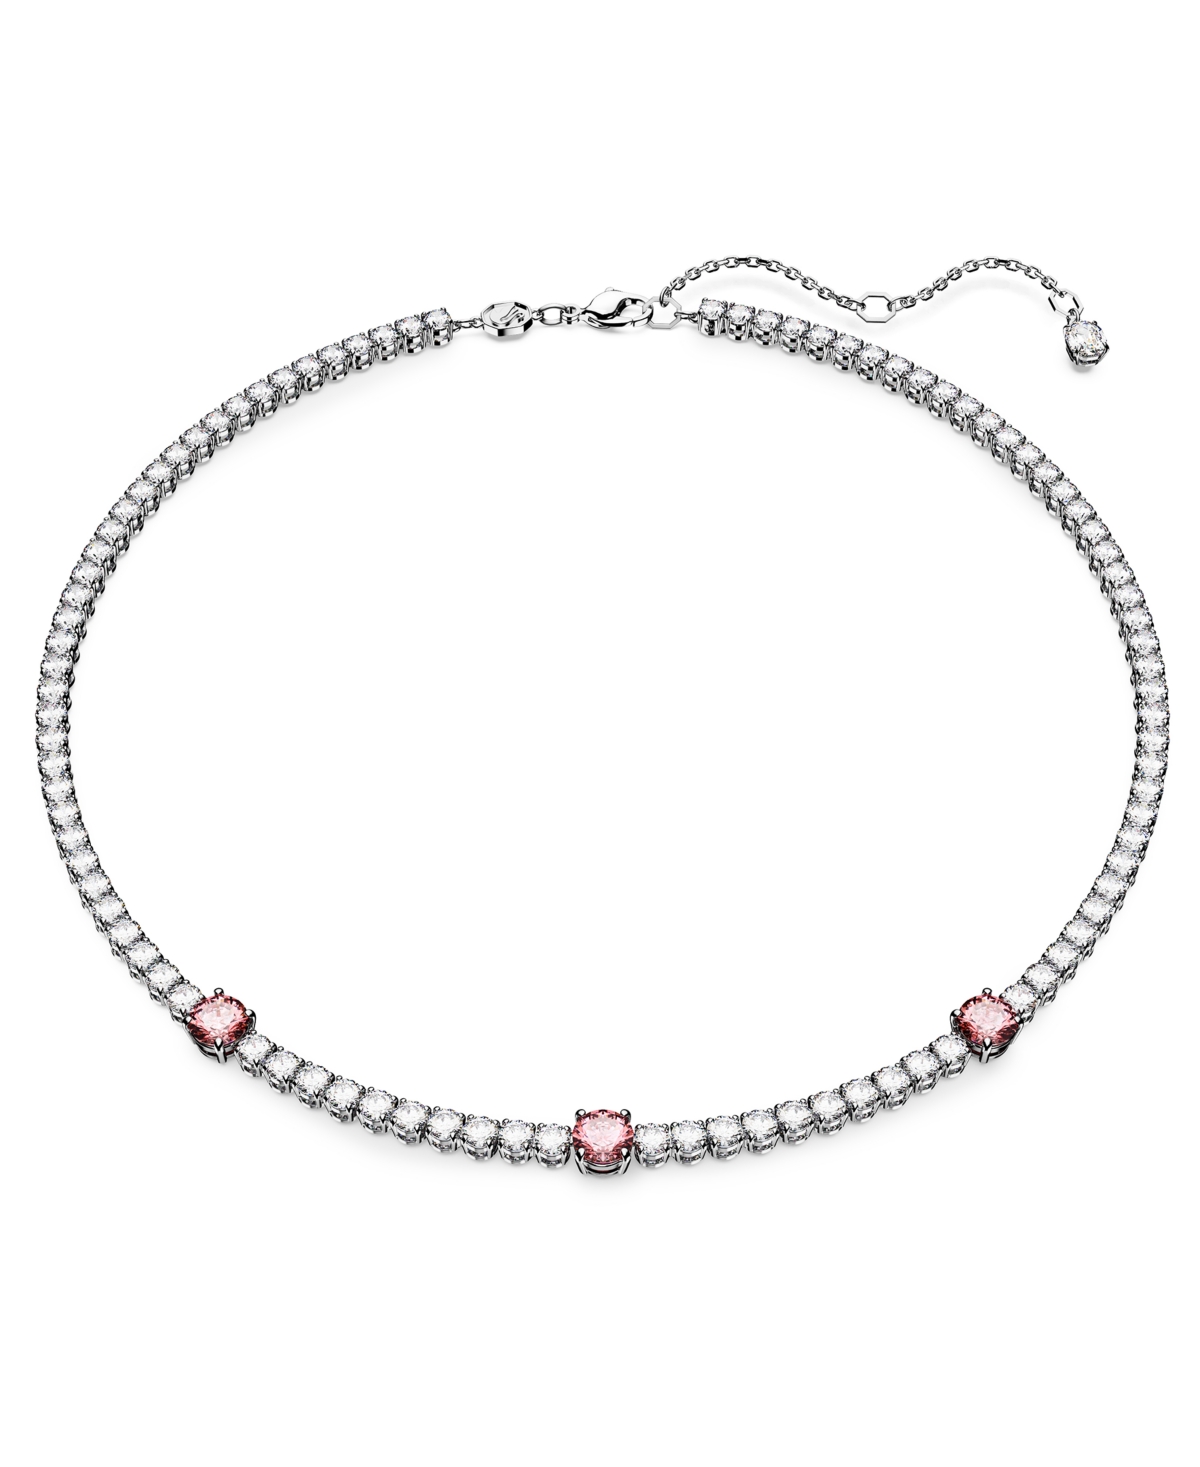 Swarovski Rhodium-plated Mixed Crystal Tennis Necklace, 15" + 2-3/4" In Pink